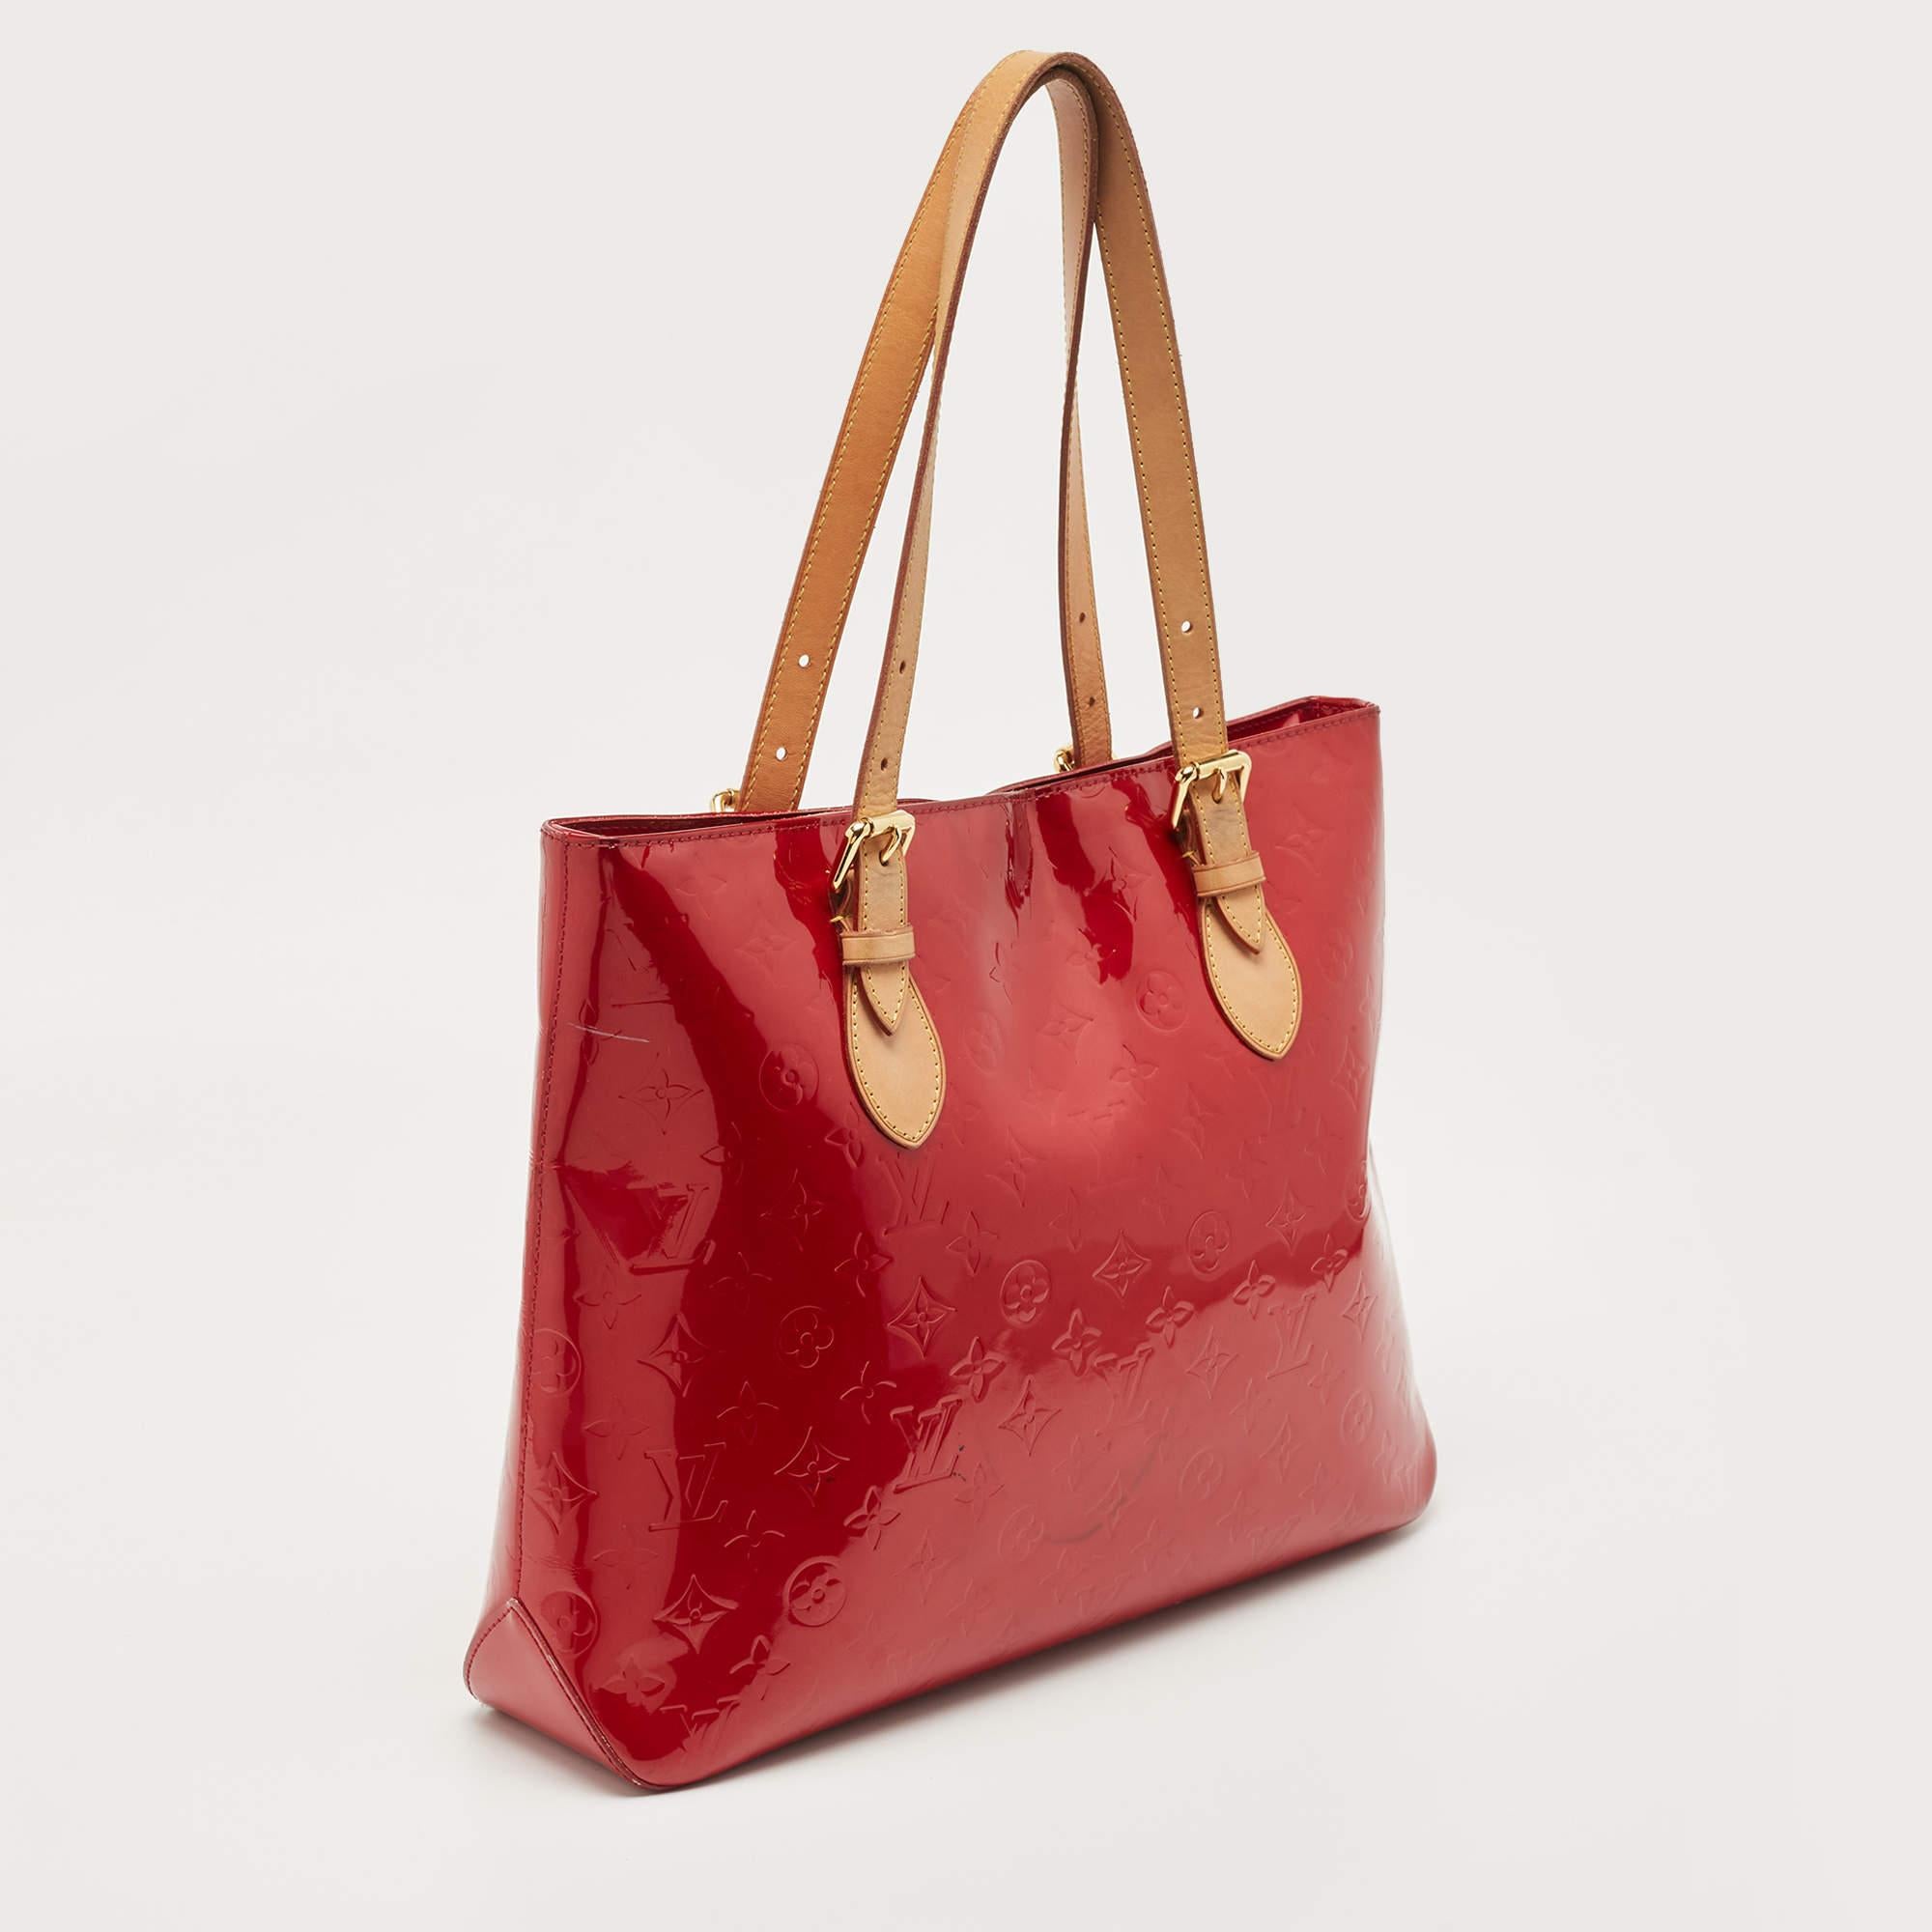 This Louis Vuitton Brentwood bag is simply a chic everyday tote. This tote holds just about anything. Fitted to the Monogram Vernis leather exterior are two flat handles, gold-tone metal, and fabric lining.

